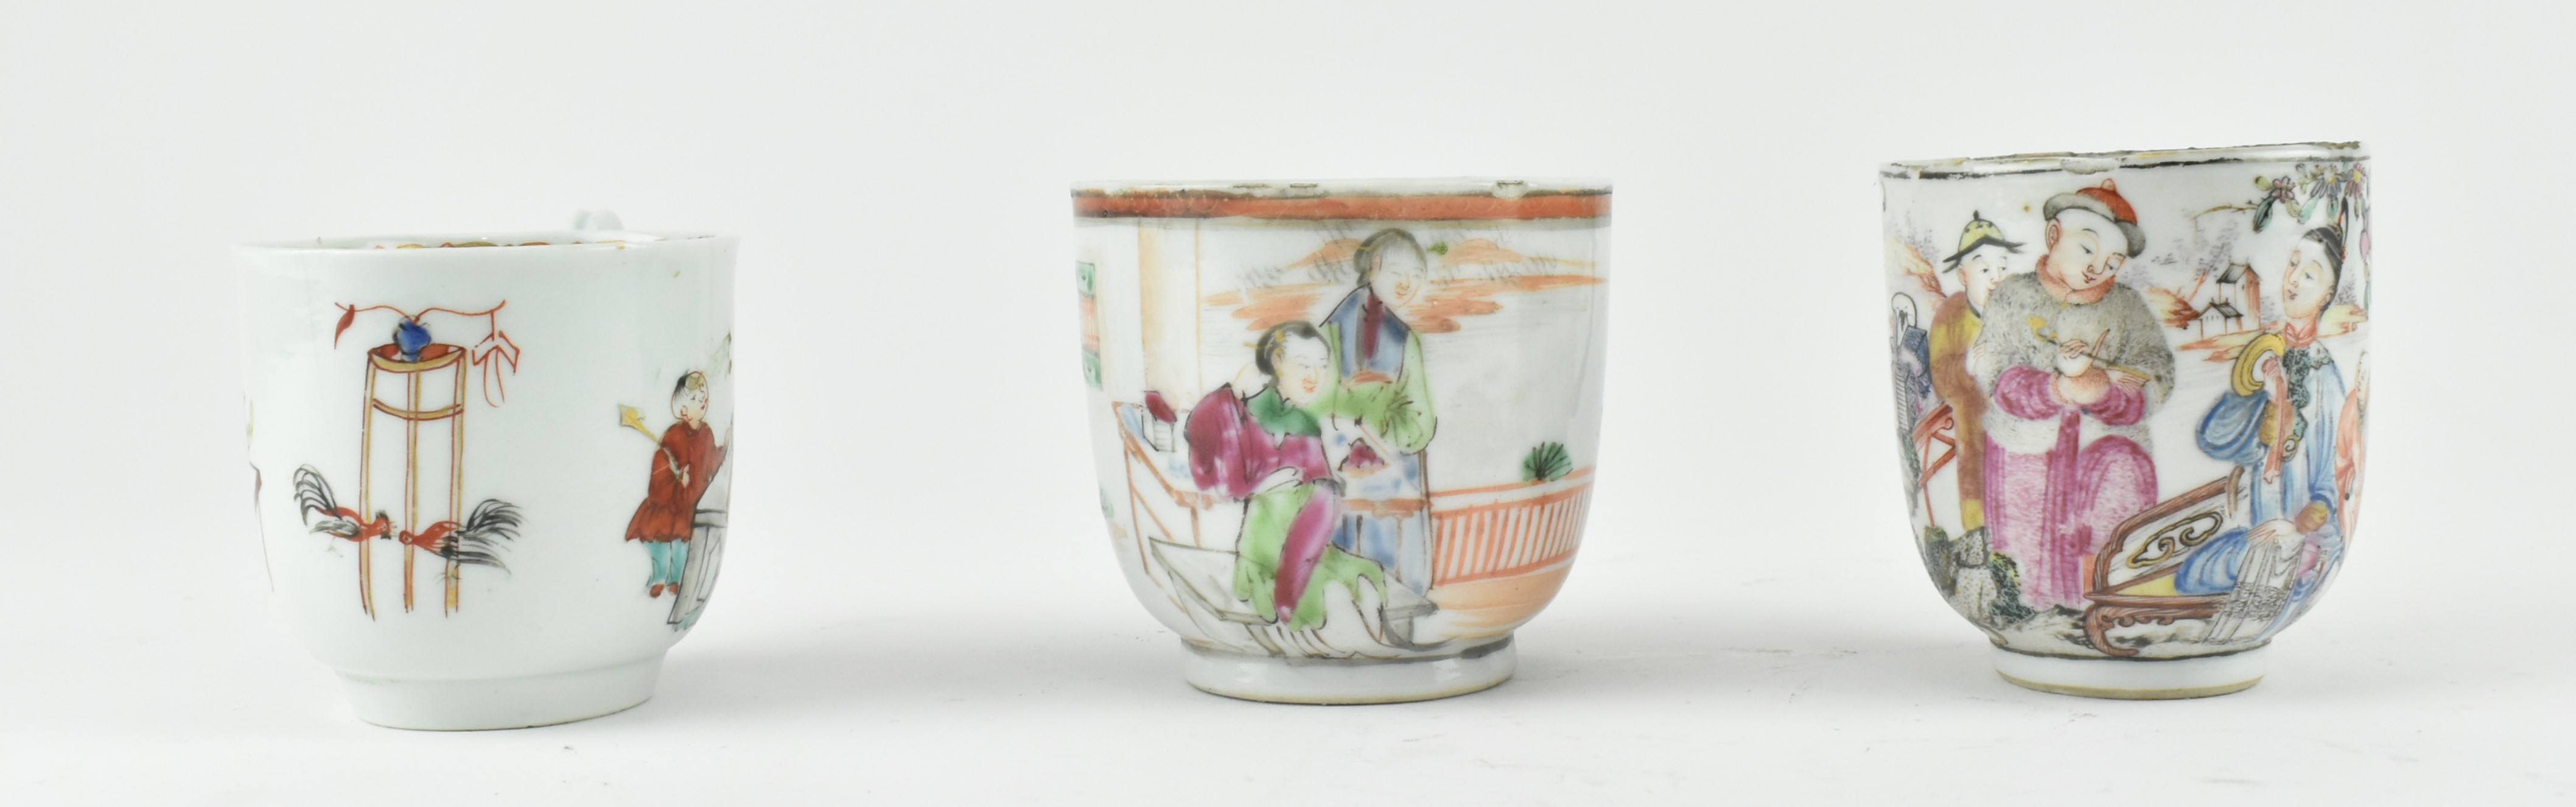 GROUP OF THREE FAMILLE ROSE FIGURINE CUPS 清及以后 粉彩人物杯 - Image 3 of 5